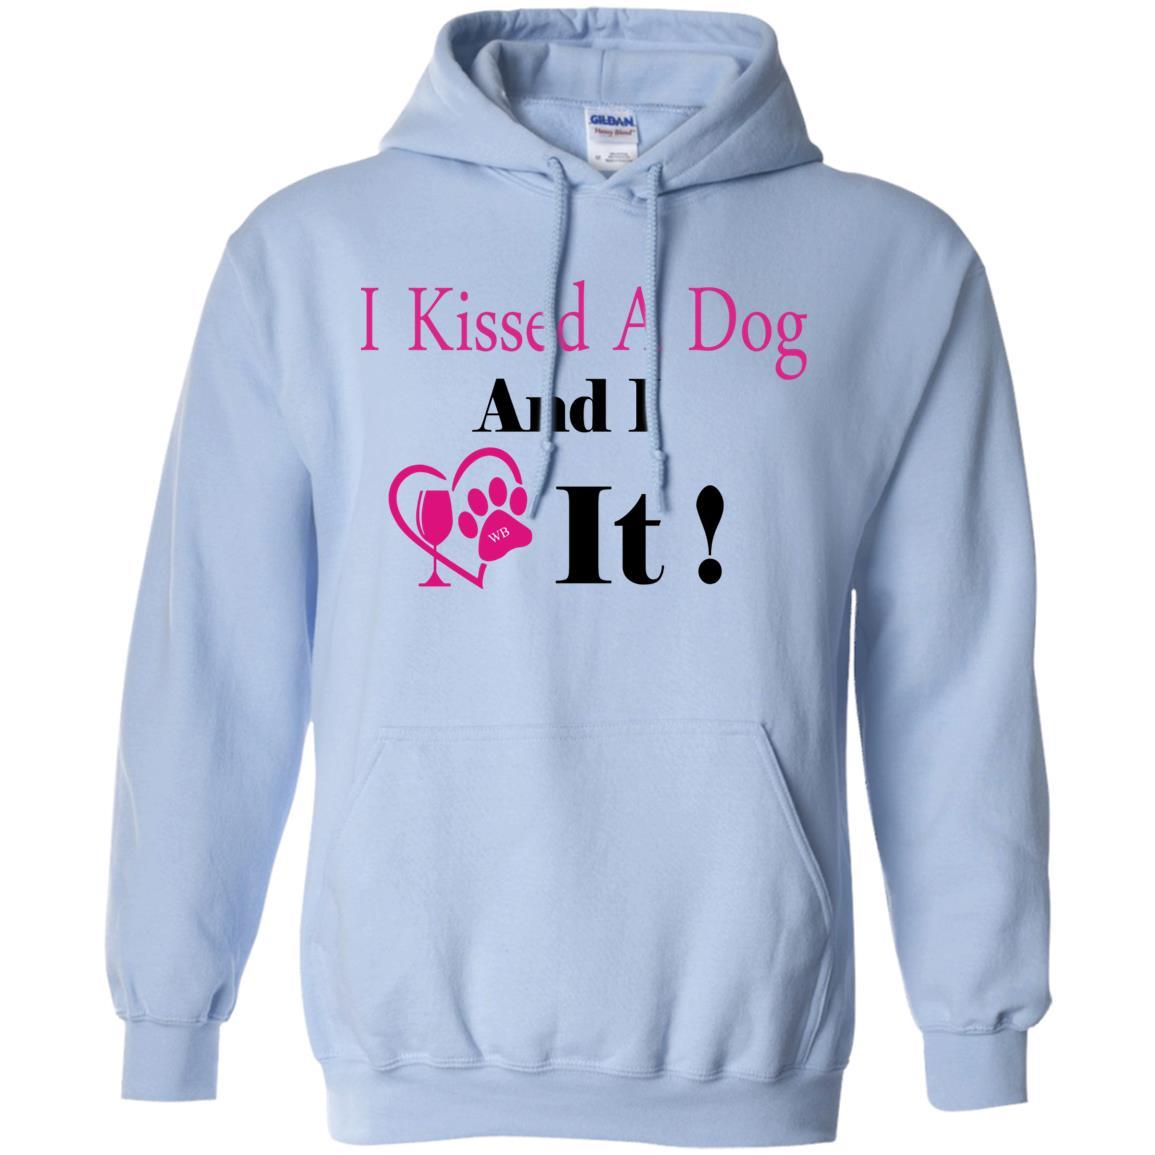 Sweatshirts Light Blue / S WineyBitches.co "I Kissed A Dog And I Loved It:"  Pullover Unisex Hoodie 8 oz. WineyBitchesCo